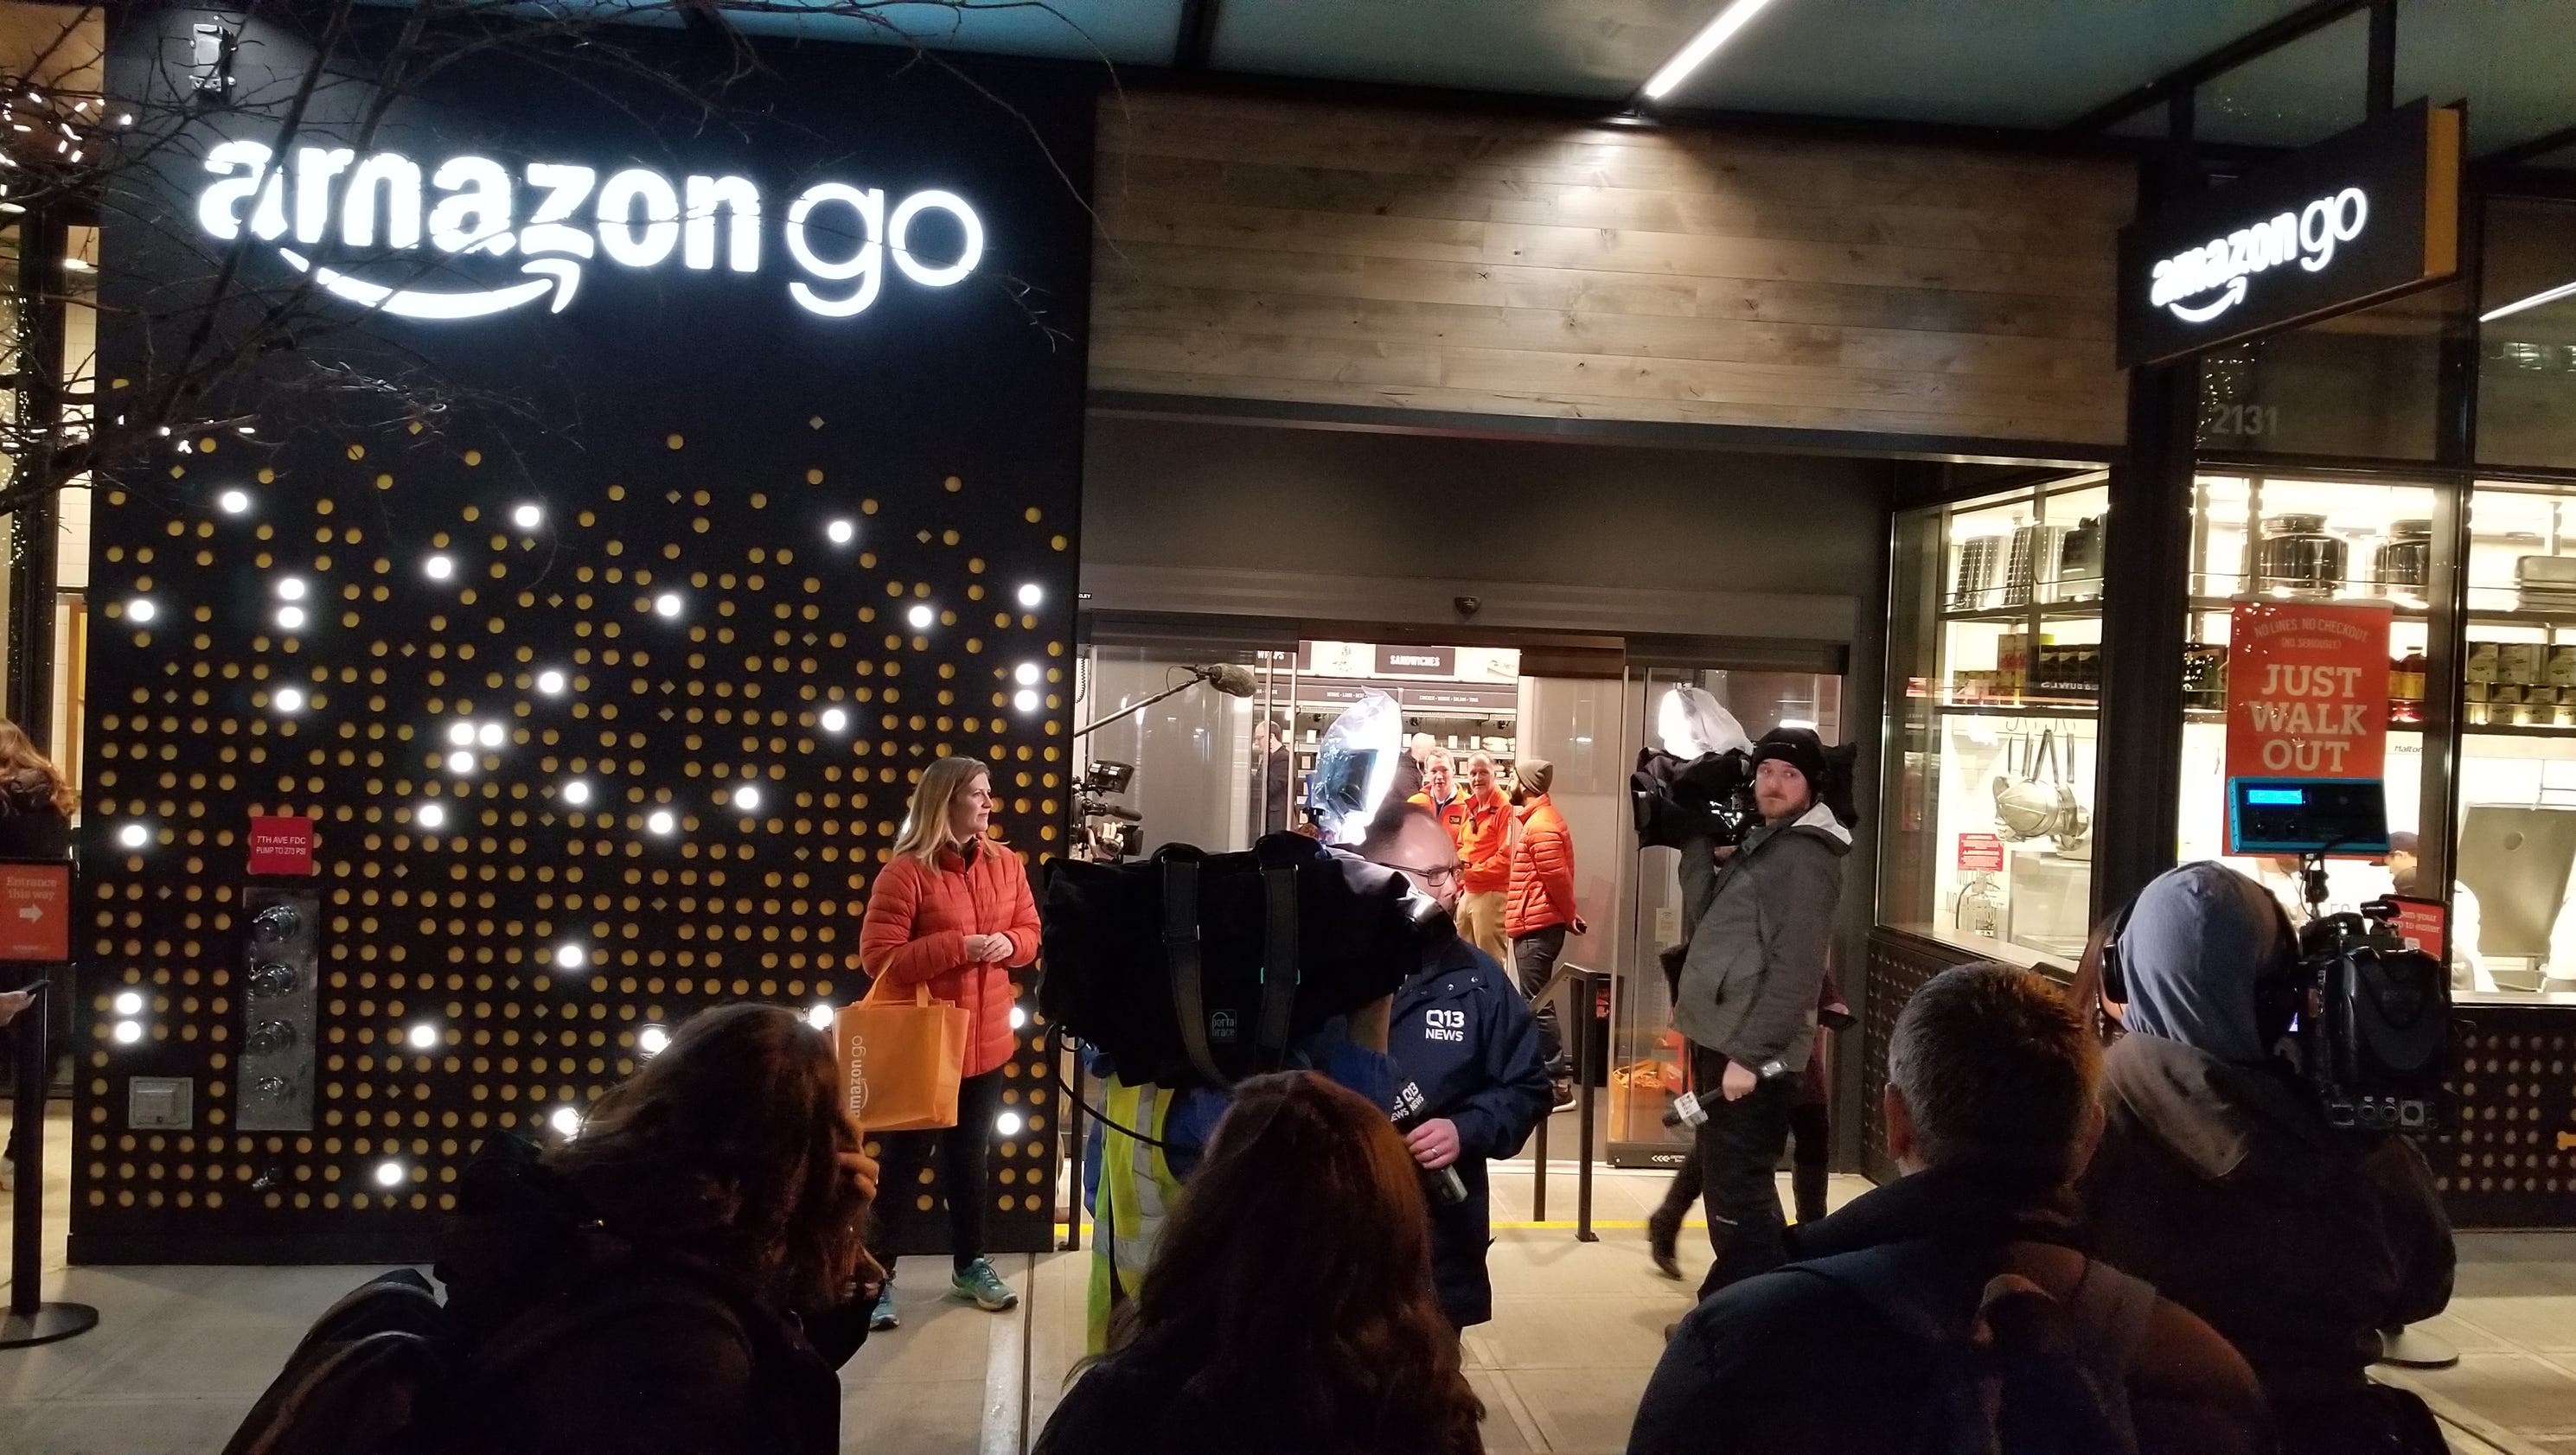 Amazon Go: Lines form in Seattle to try checkout-free shopping3200 x 1680